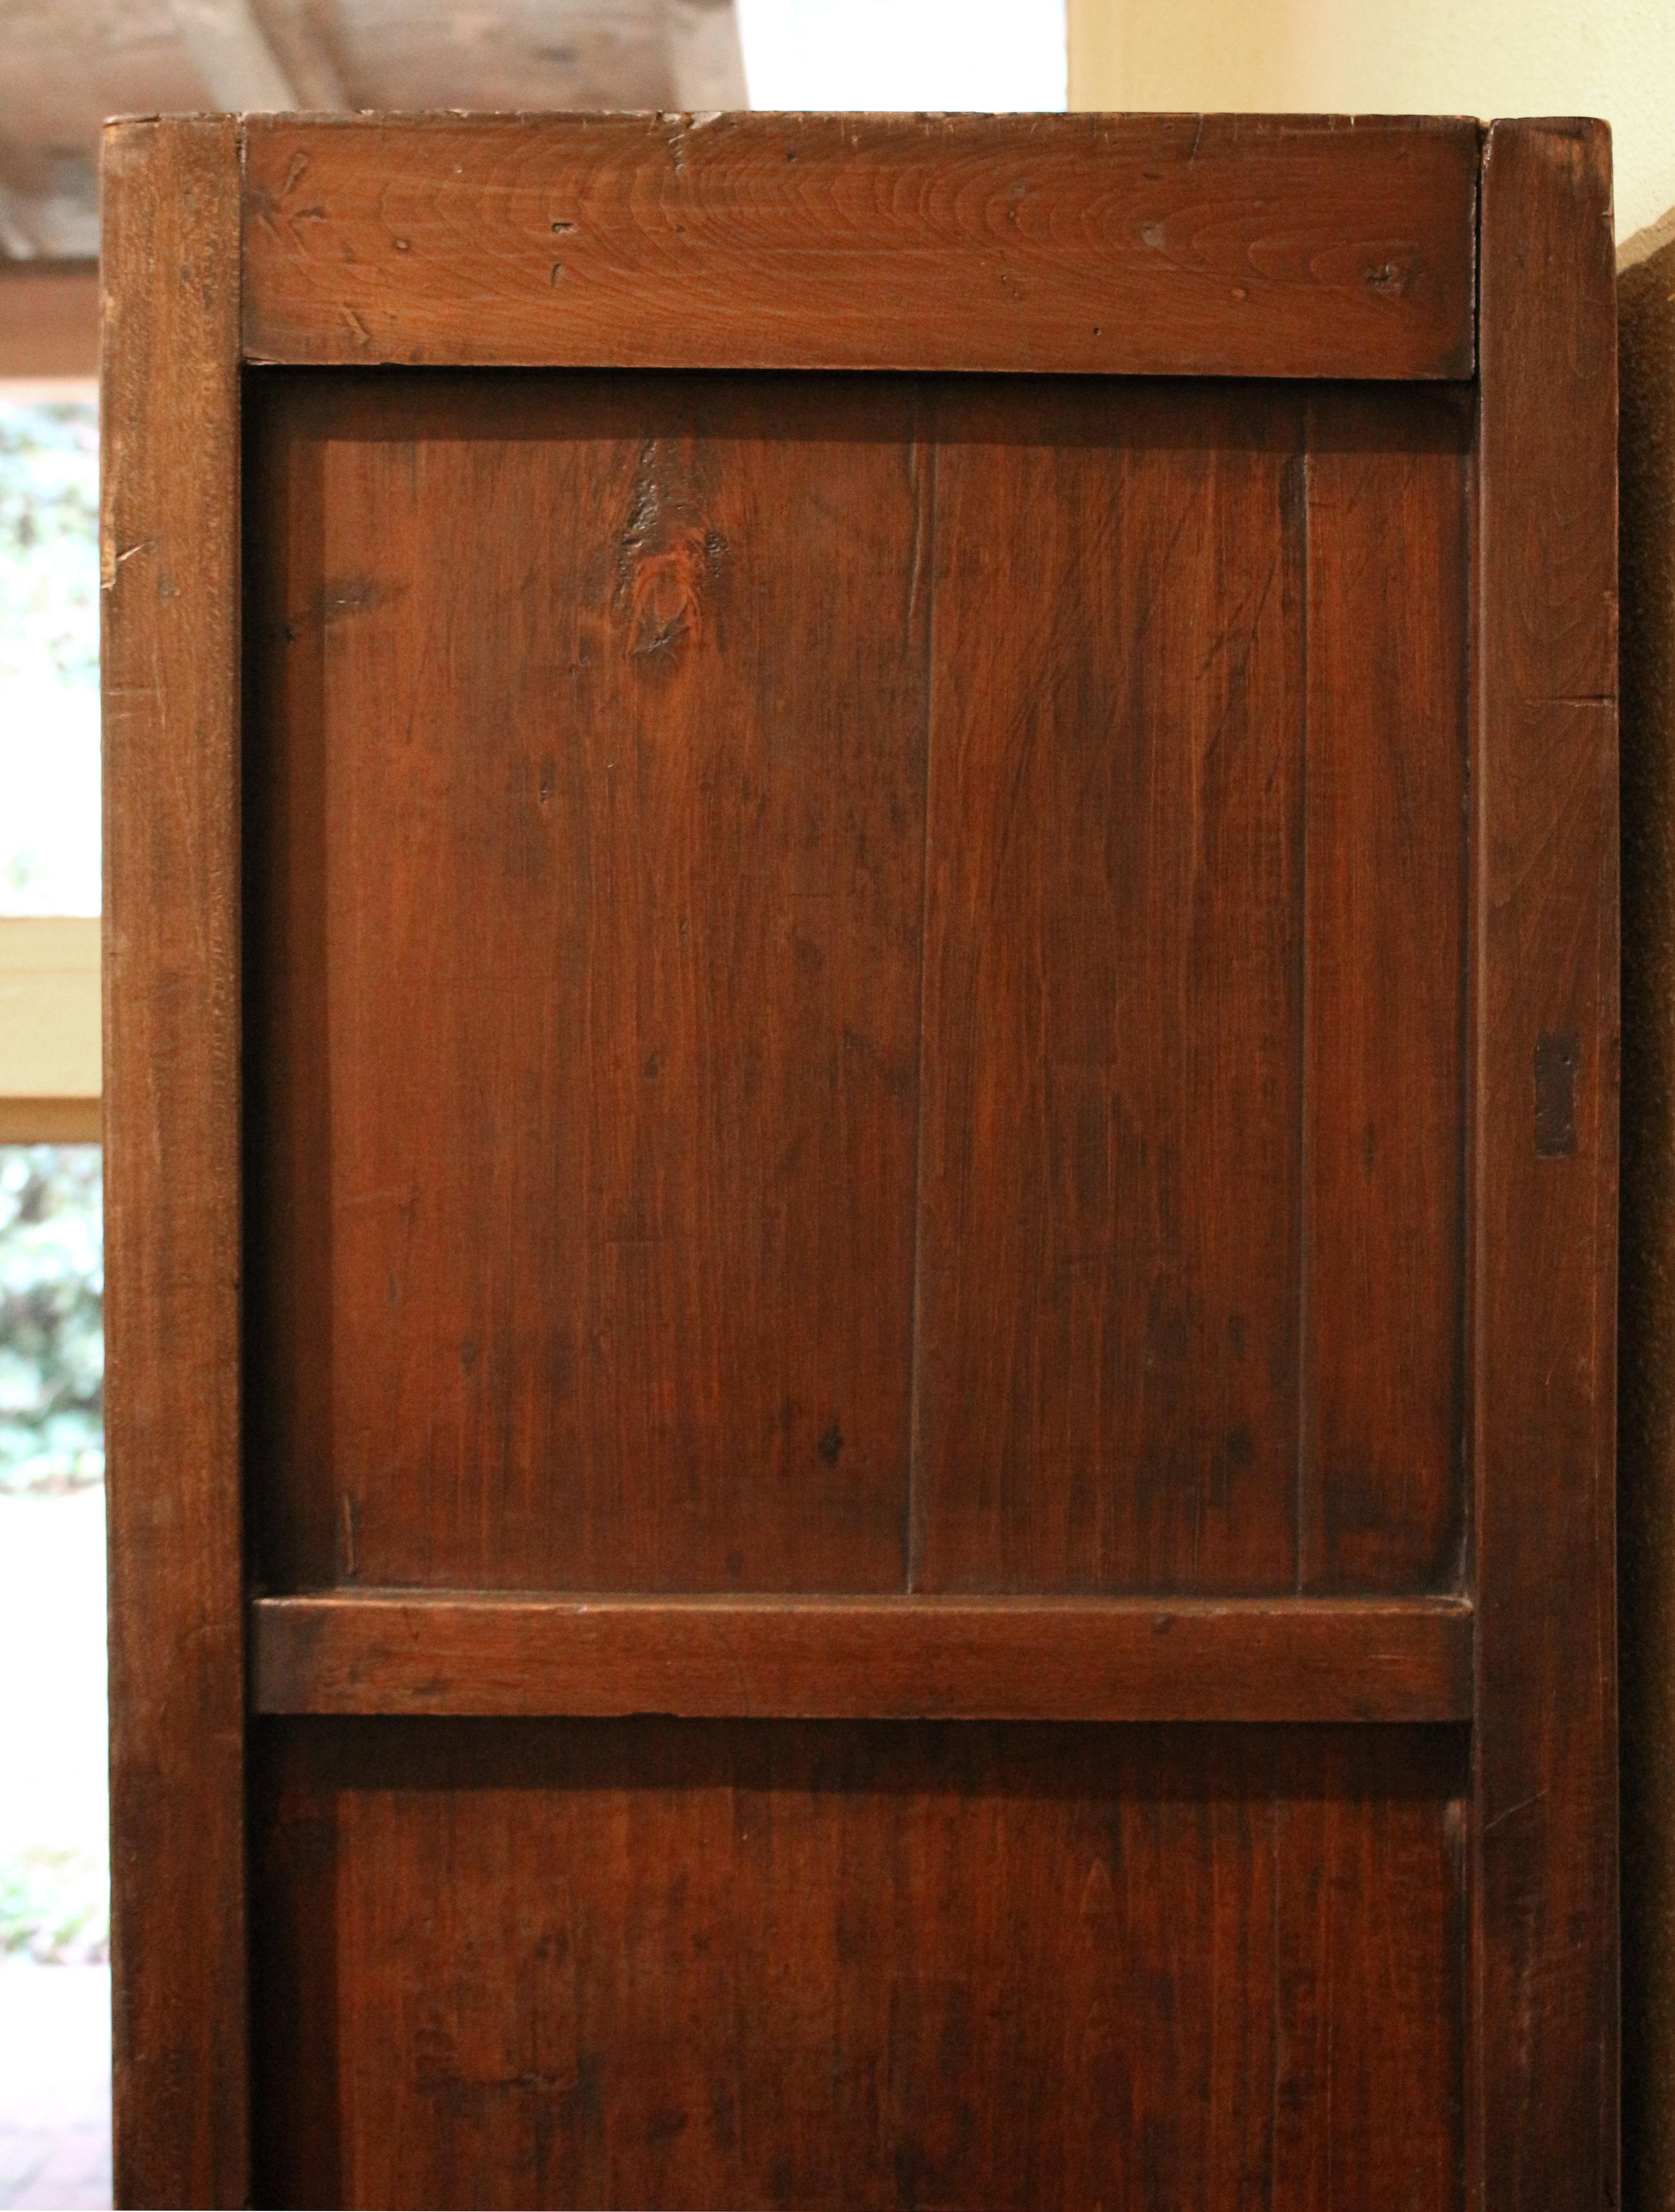 Circa 1880 Chinese Carved Wardrobe Cabinet, Qing Dynasty For Sale 2